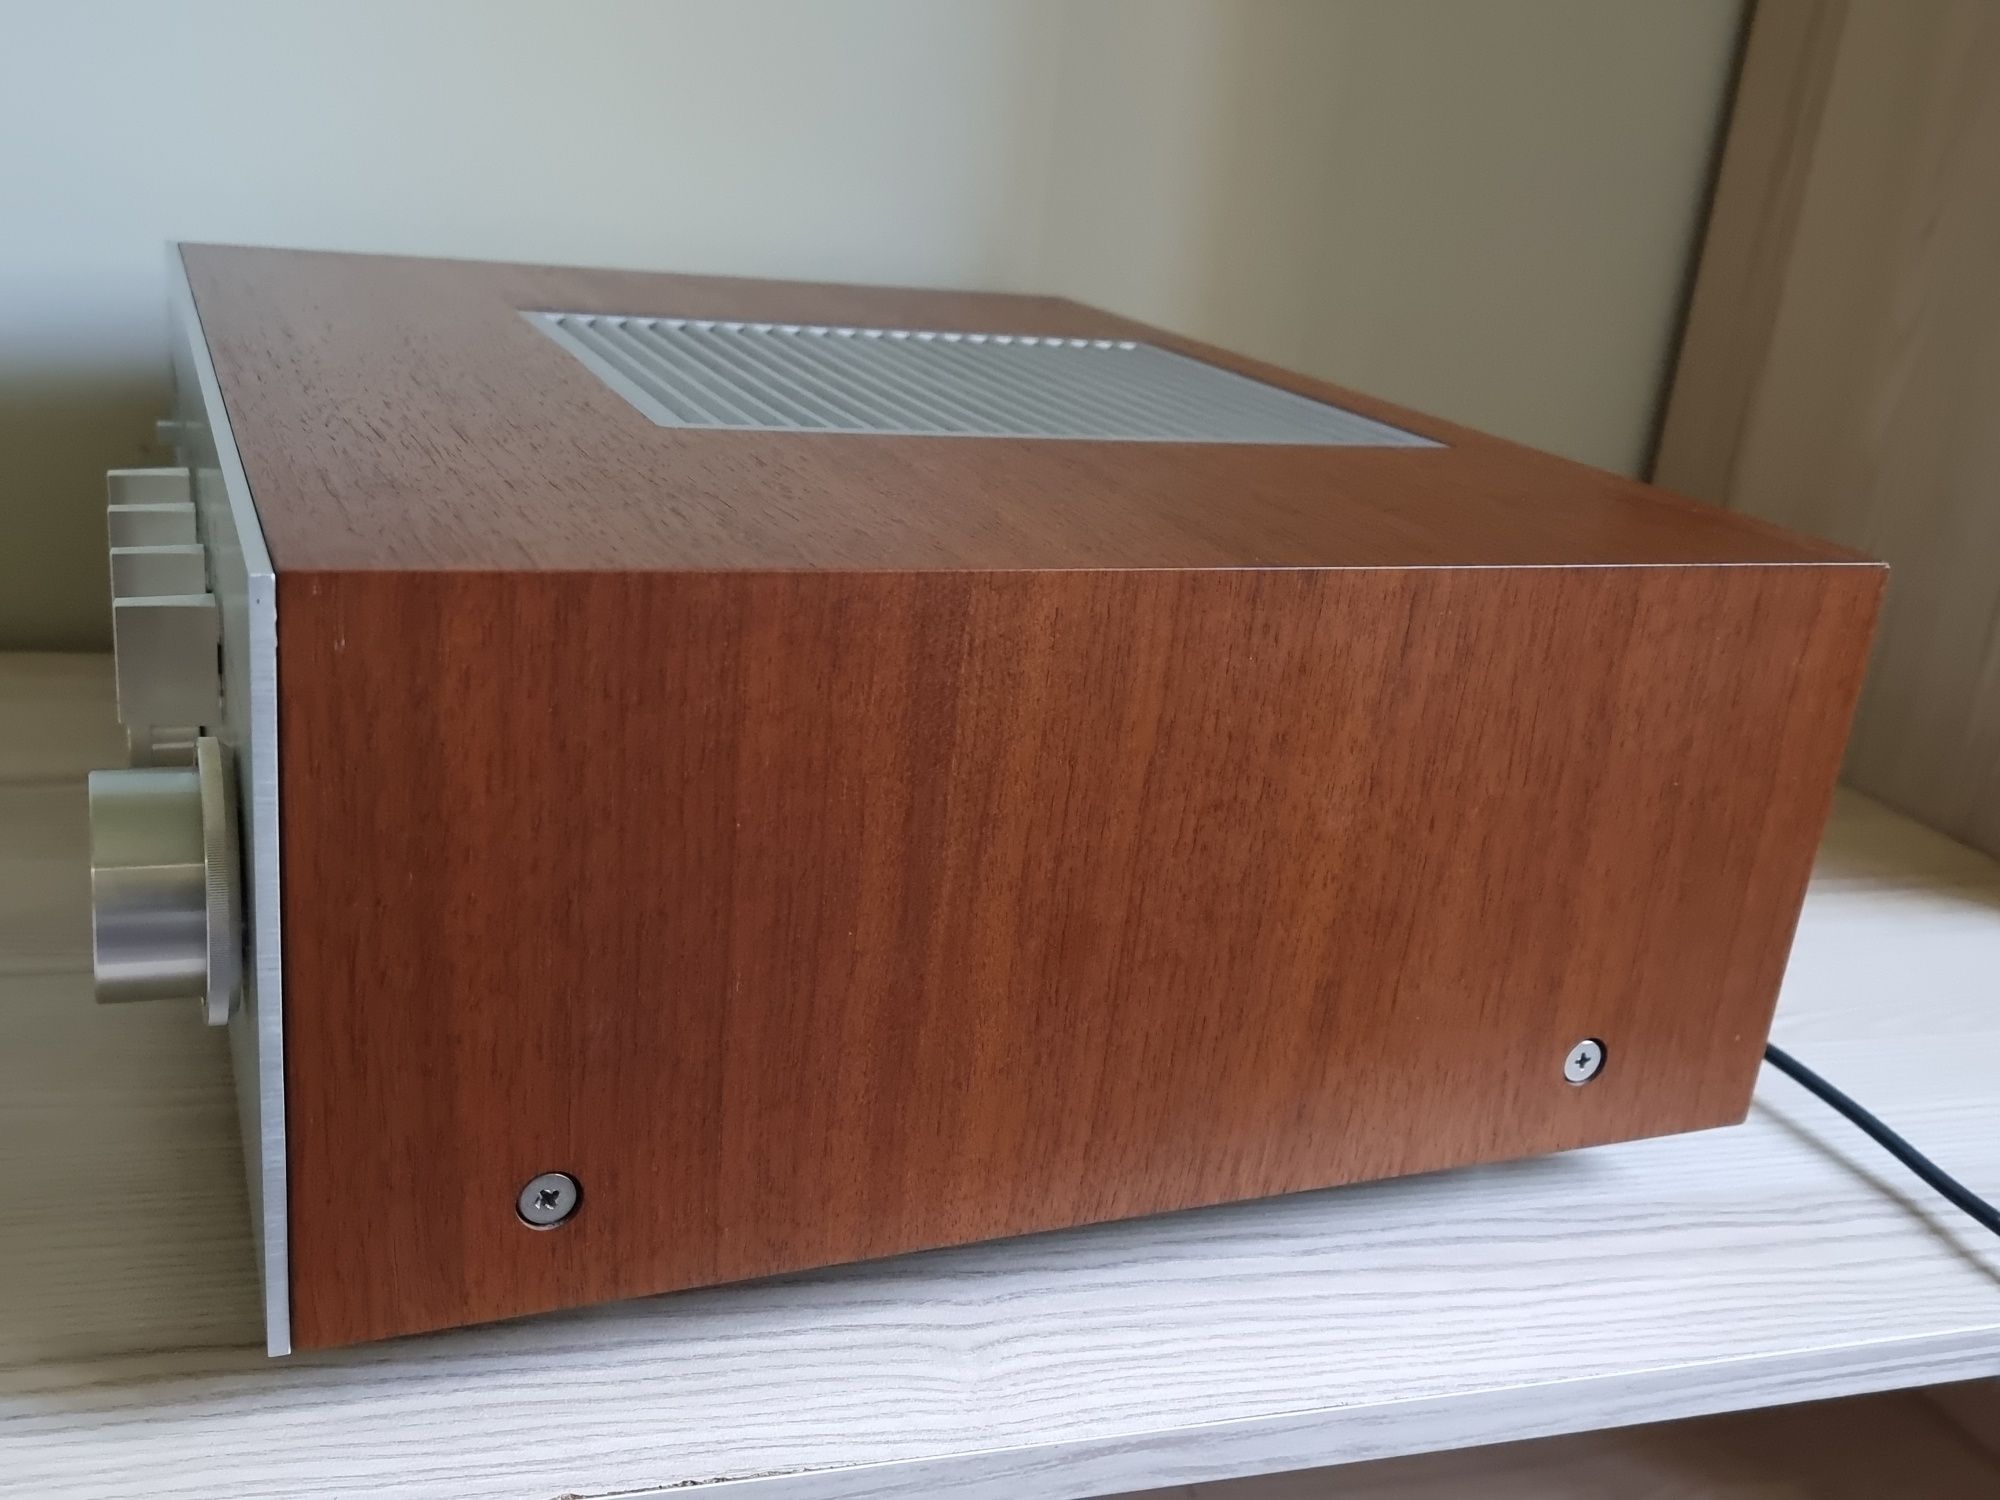 YAMAHA CA-2010 Natural Sound Integrated Stereo Amplifier